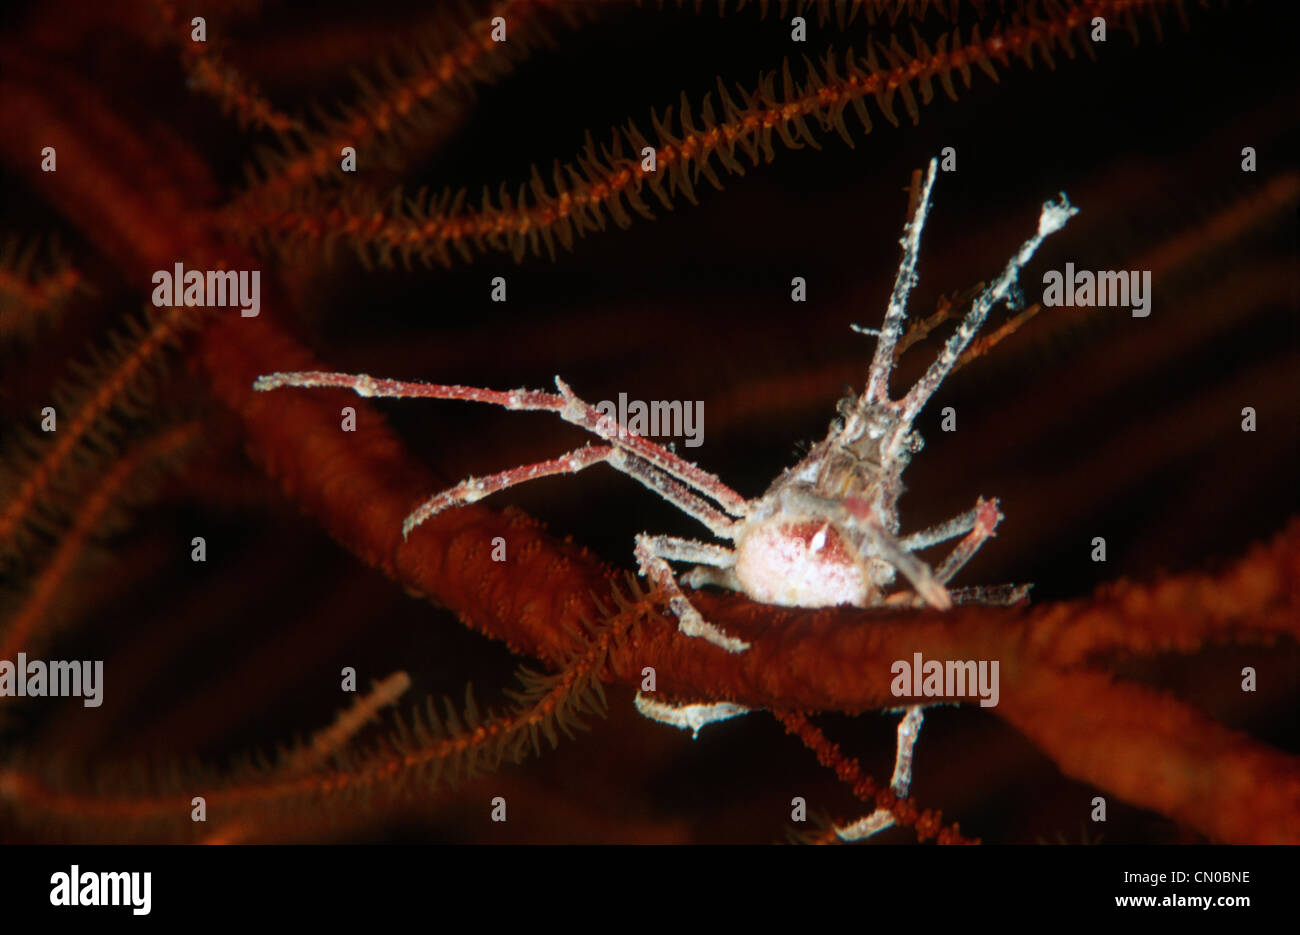 Decorator crab, Naxioides taurus, also called bull crab, from the Red Sea. It's holding on to a red sea fan. Stock Photo